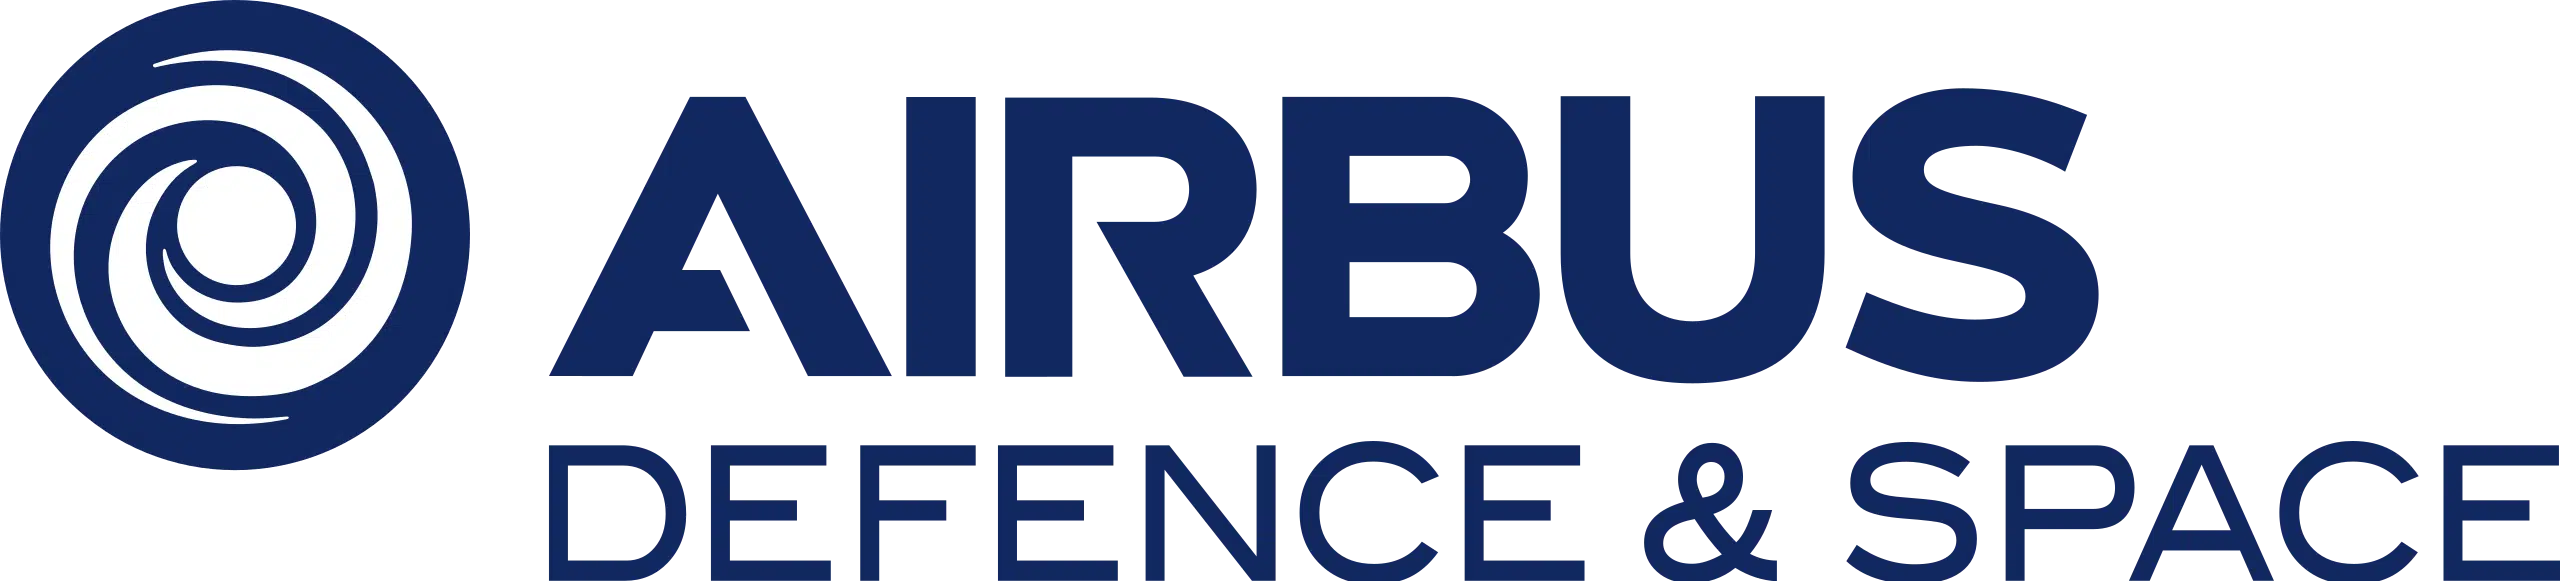 Airbus Defence and Space Logo